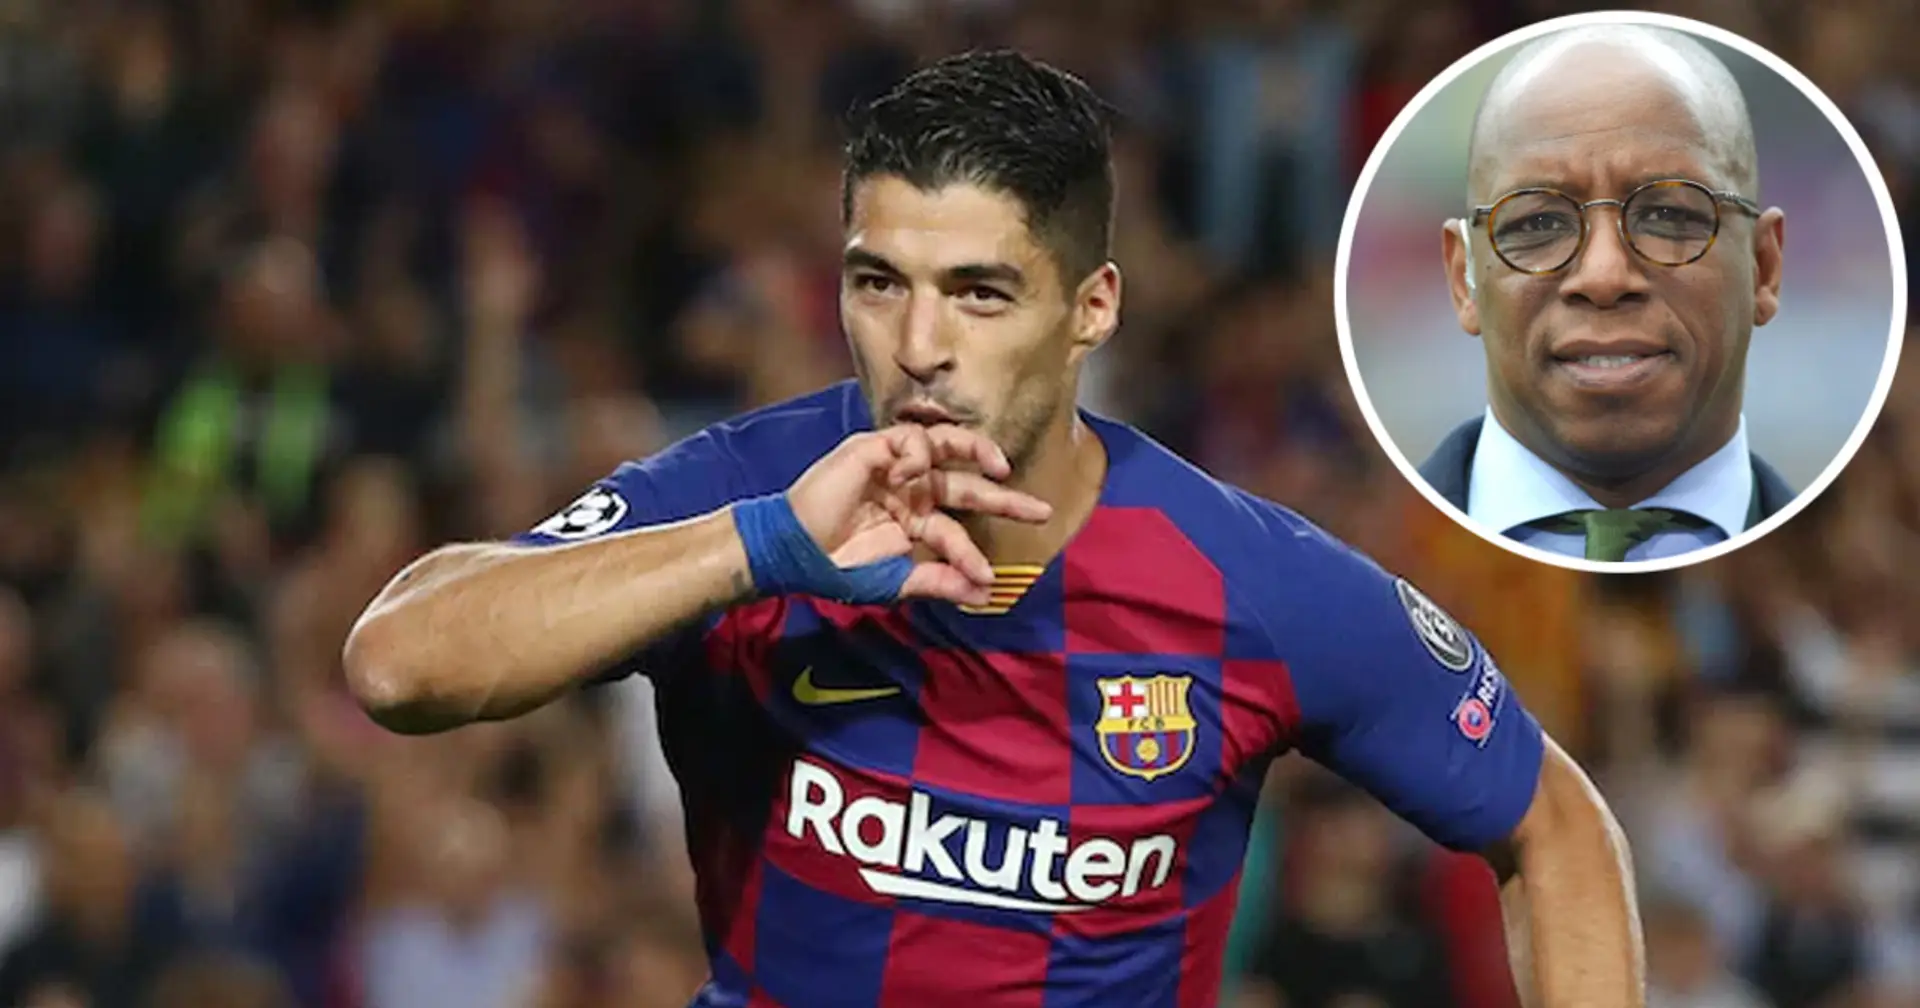 'It’s a nightmare to think about': Premier League icon Ian Wright blasts Arsenal over ridiculous Luis Suarez bid